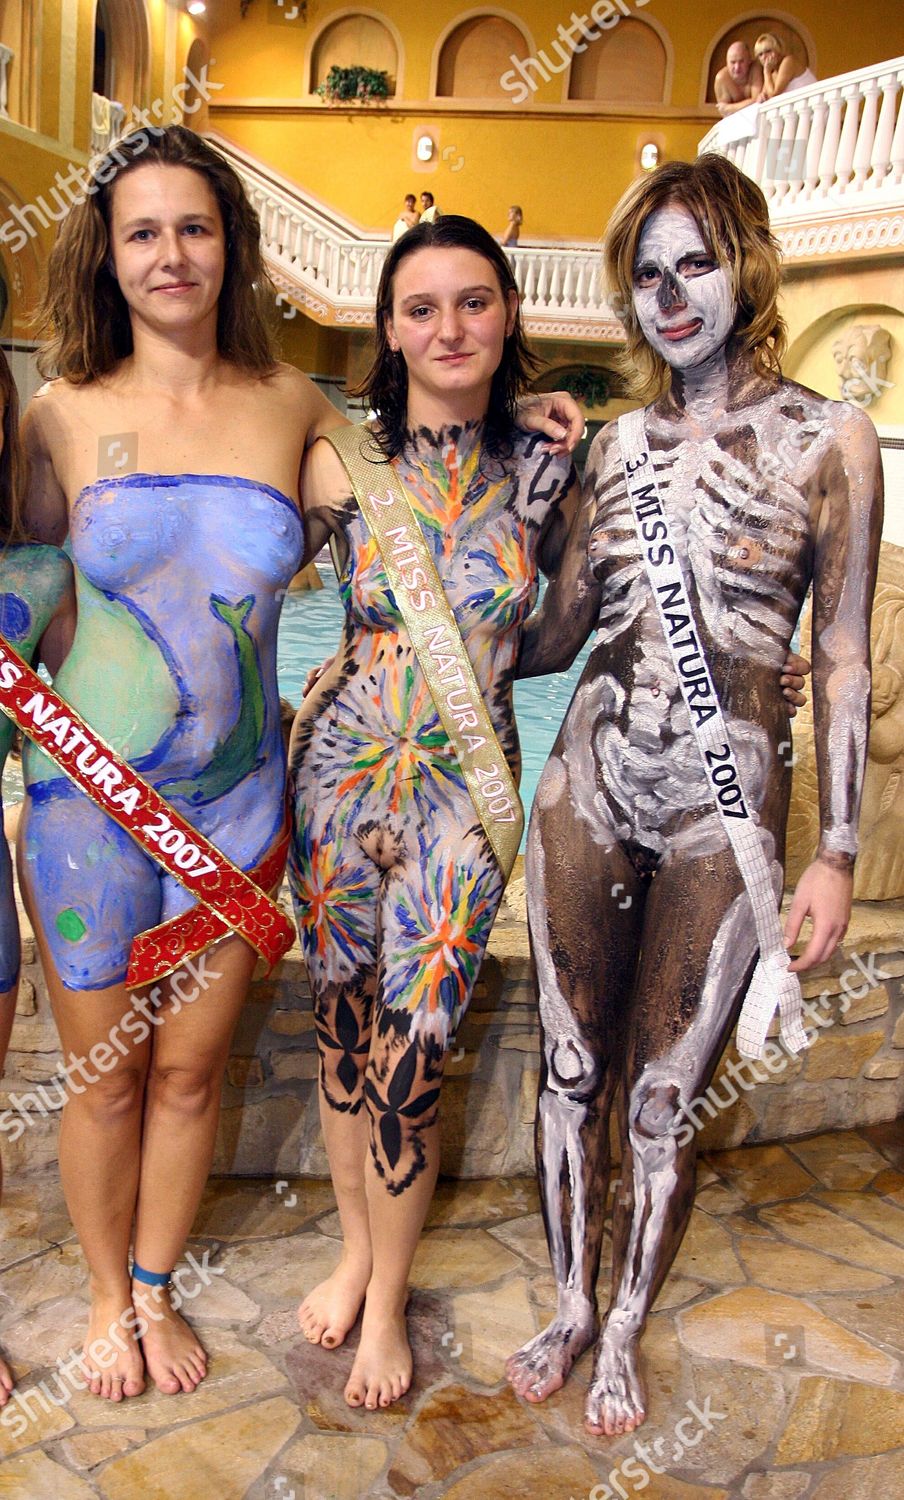 World of beauty nudism beauty contest